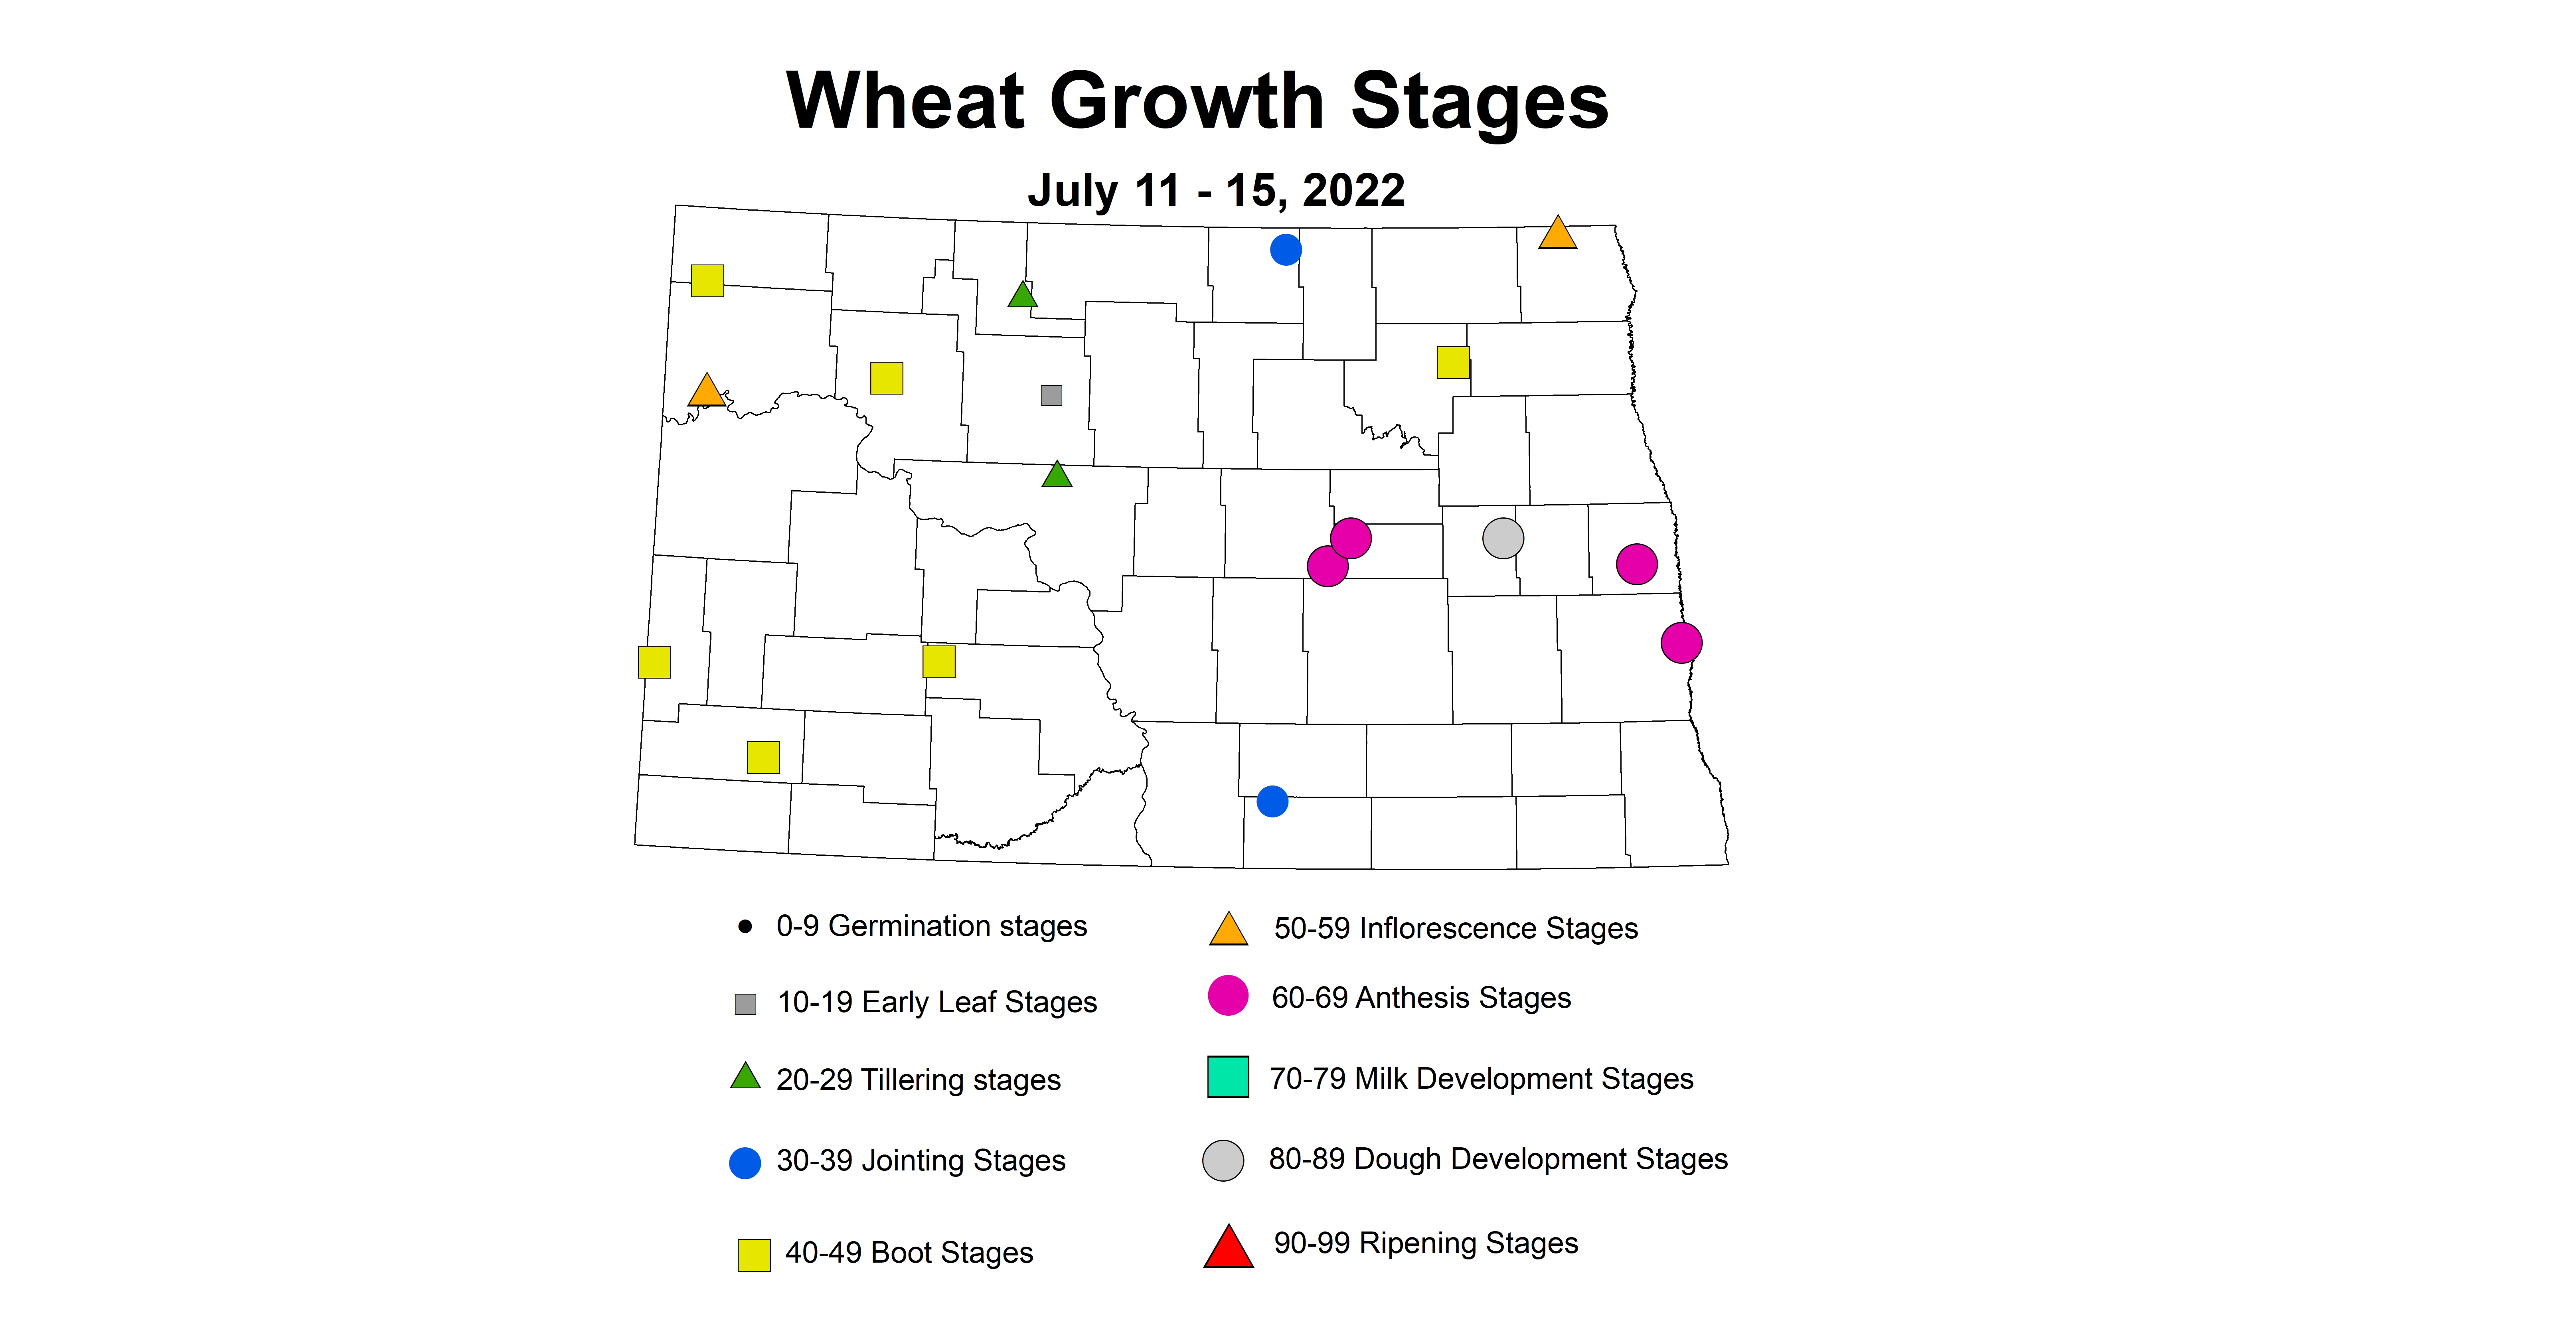 wheat growth stages 2022 7.11-7.15